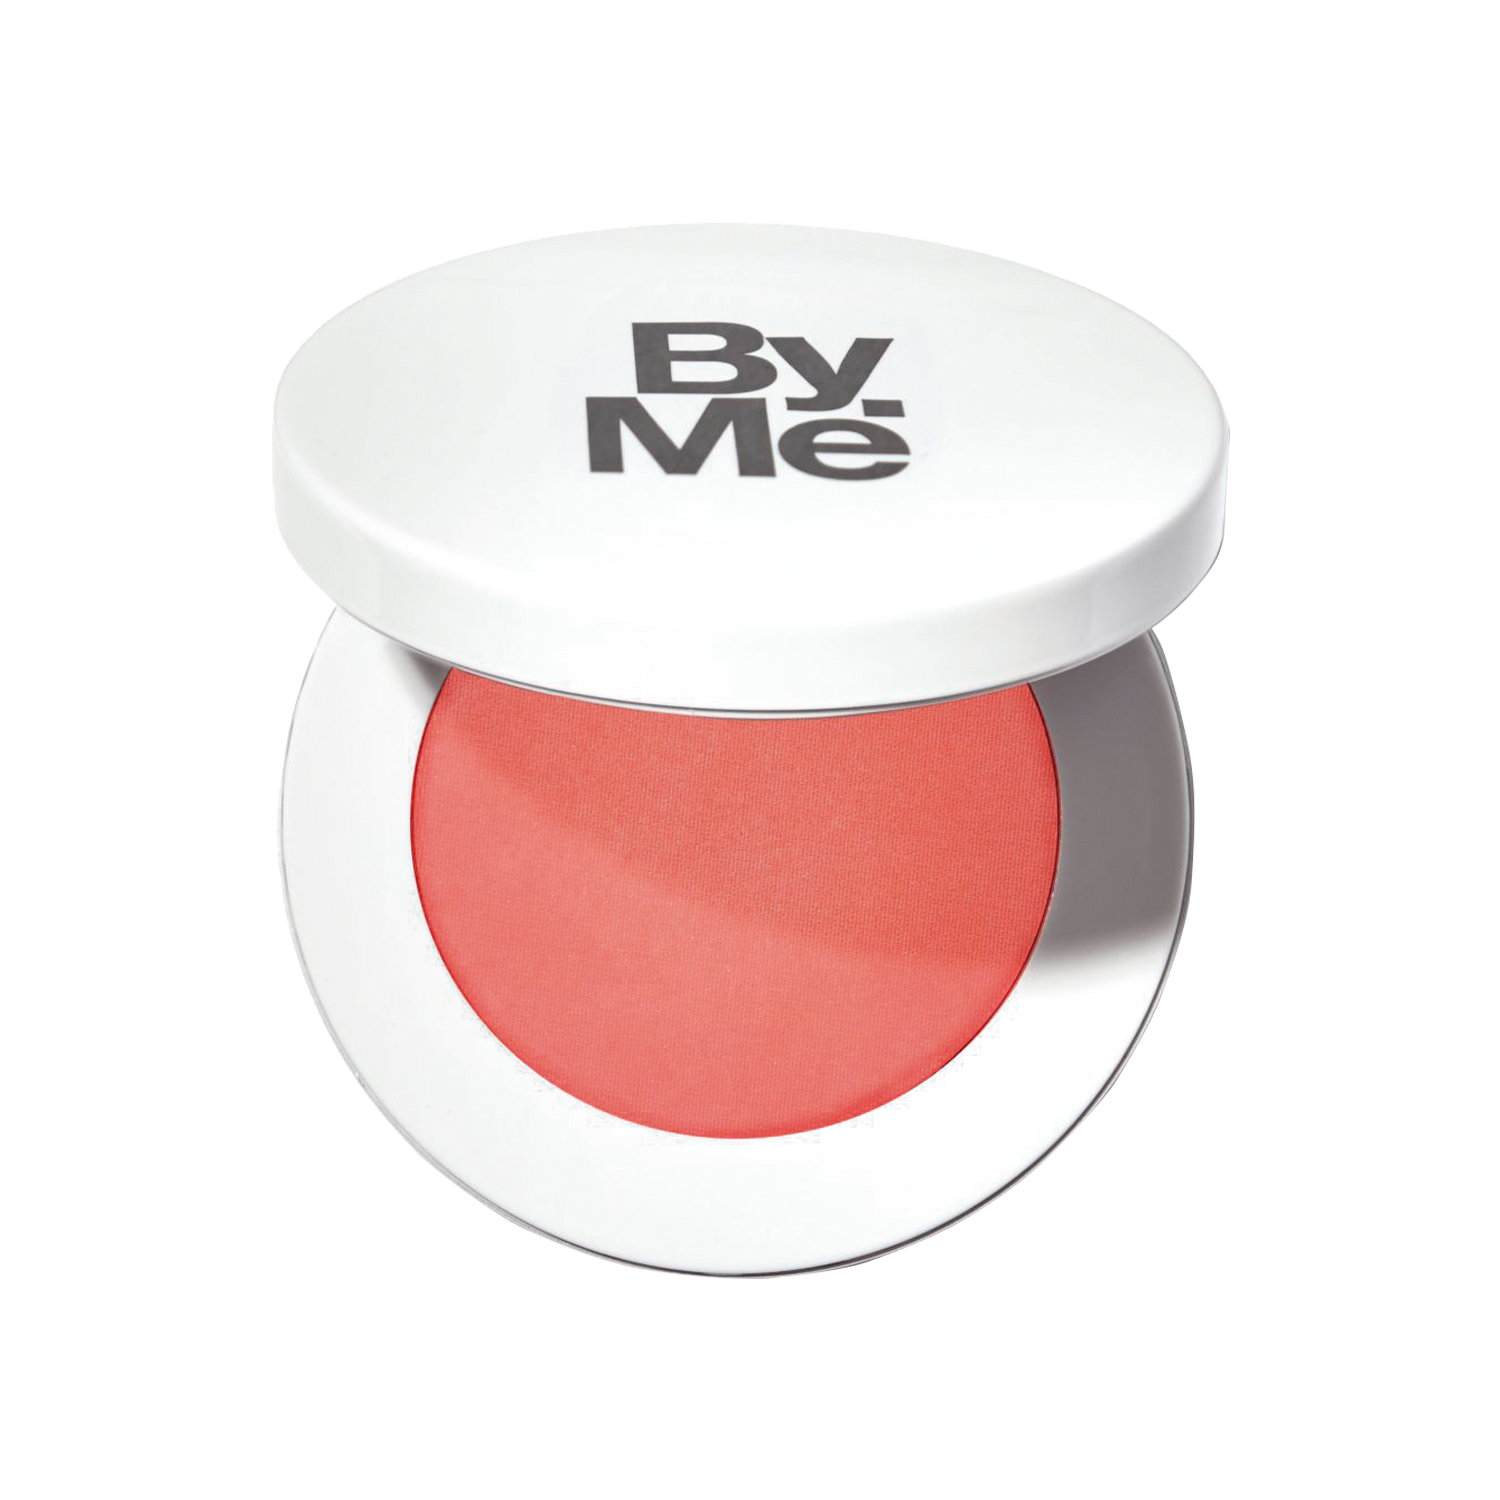 MyBeautyBrand Pure Power Blush in India Coral 502 MyBeautyBrand Pure Power Blush in India Coral 502 1